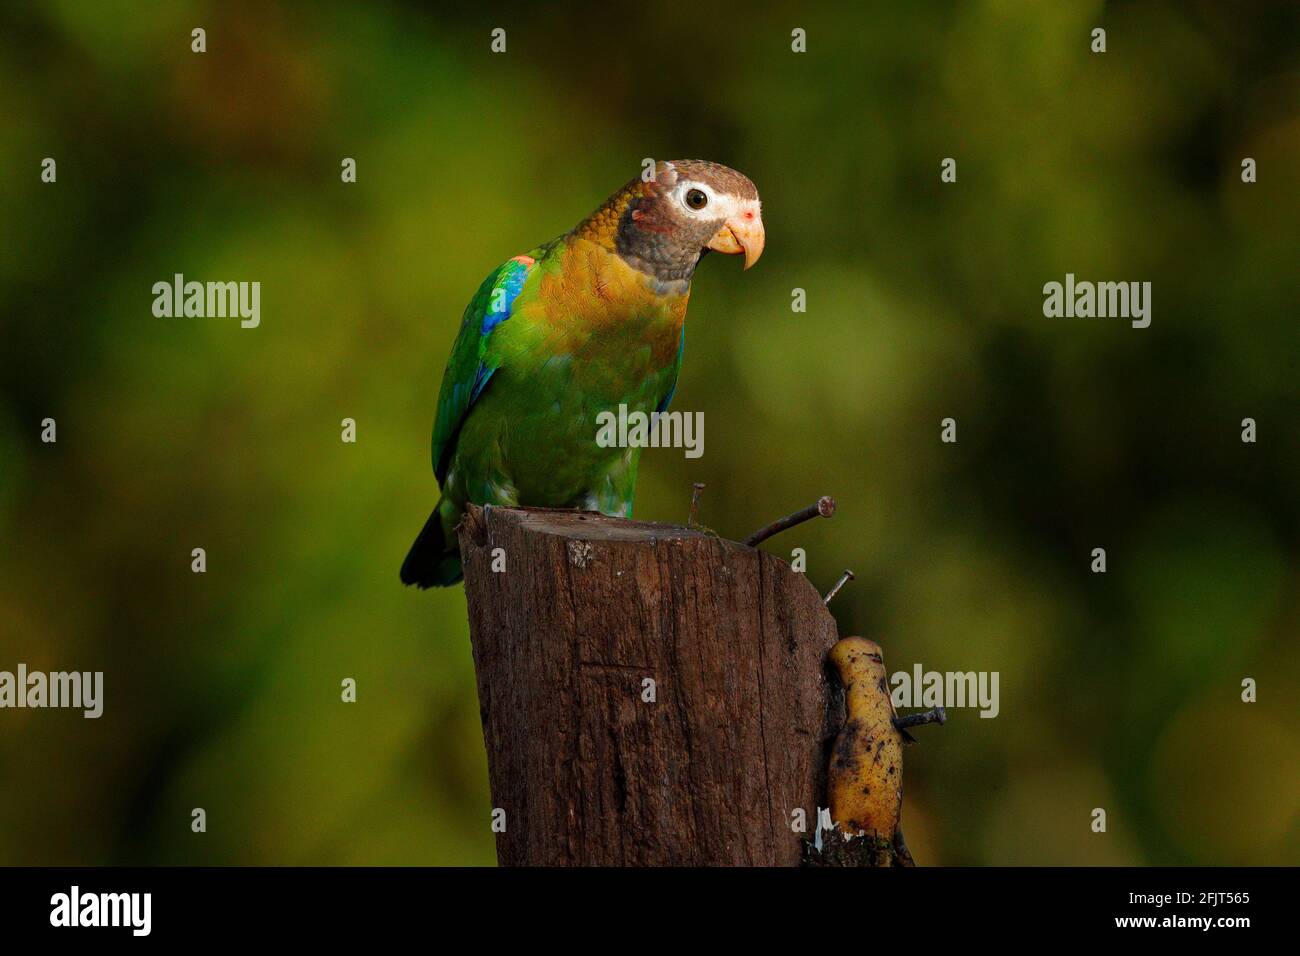 Brown-hooded Parrot, Pionopsitta haematotis, portrait of light green parrot with brown head. Detail close-up portrait of bird from Central America. Wi Stock Photo